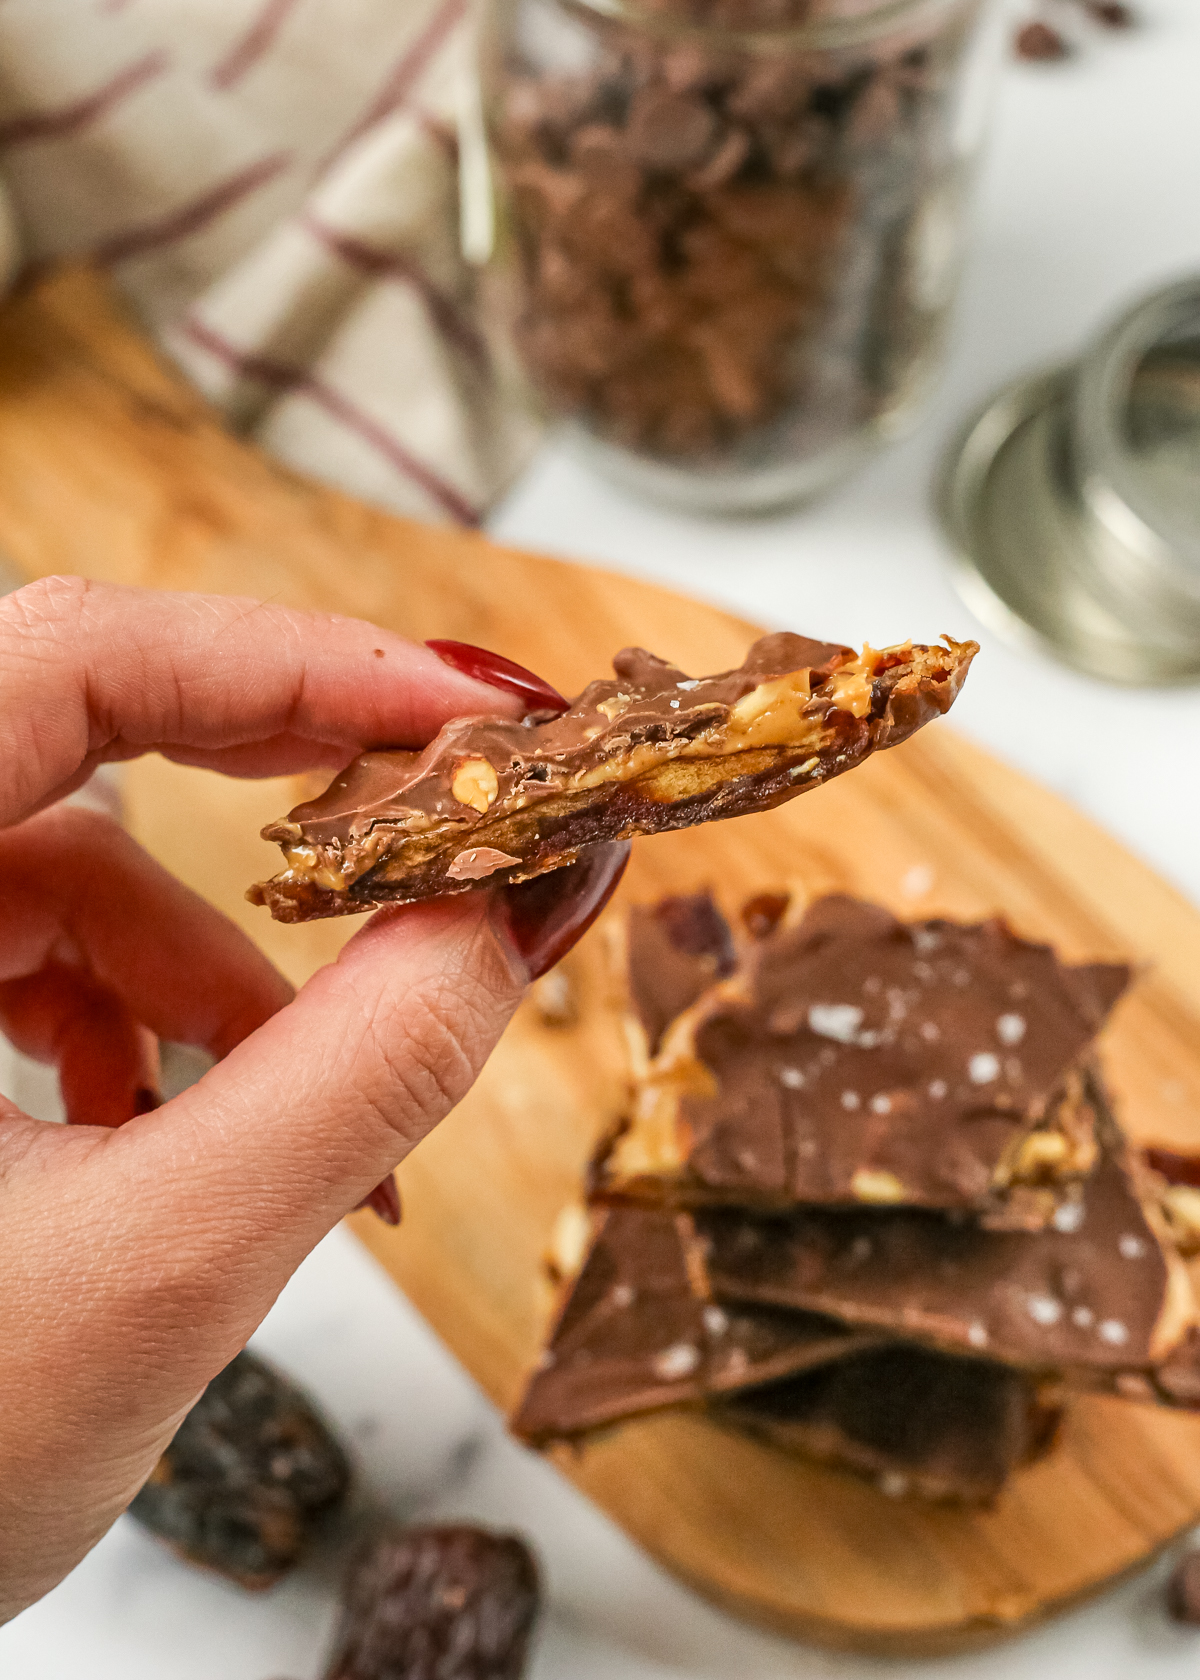 A woman's hand holds a piece of chocolate date bark, showing the layers of dates, peanut butter, and chocolate, with more pieces of date bark in the background in a kitchen setting